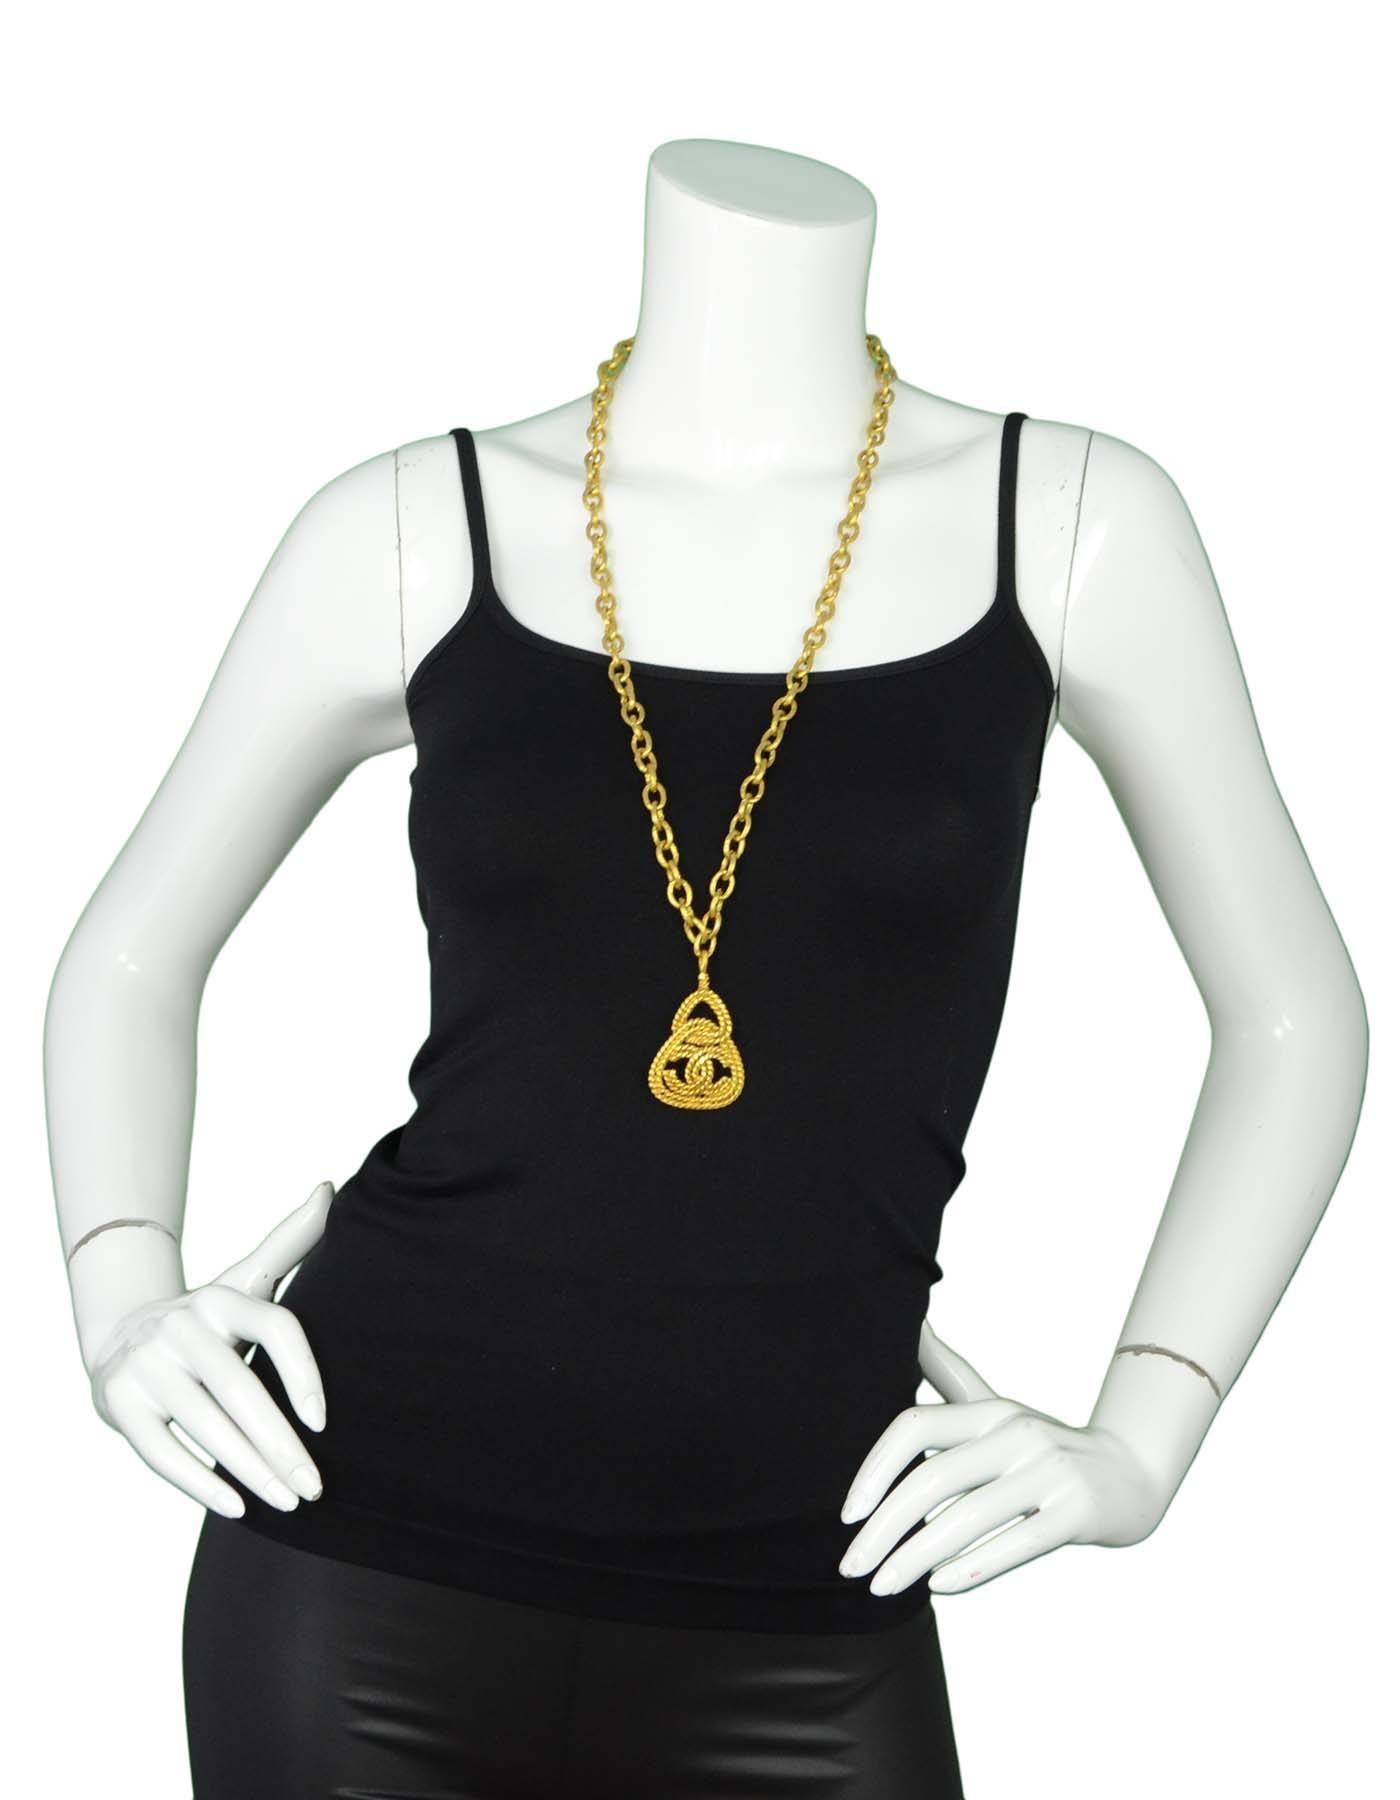 Chanel Vintage Necklace with CC Charm

Features CC pendant

Made In: France
Year of Production: 1991
Color: Goldtone
Materials: Metal
Closure: Jumpring closure
Stamp: 2 CC 8
Overall Condition: Excellent vintage, pre-owned